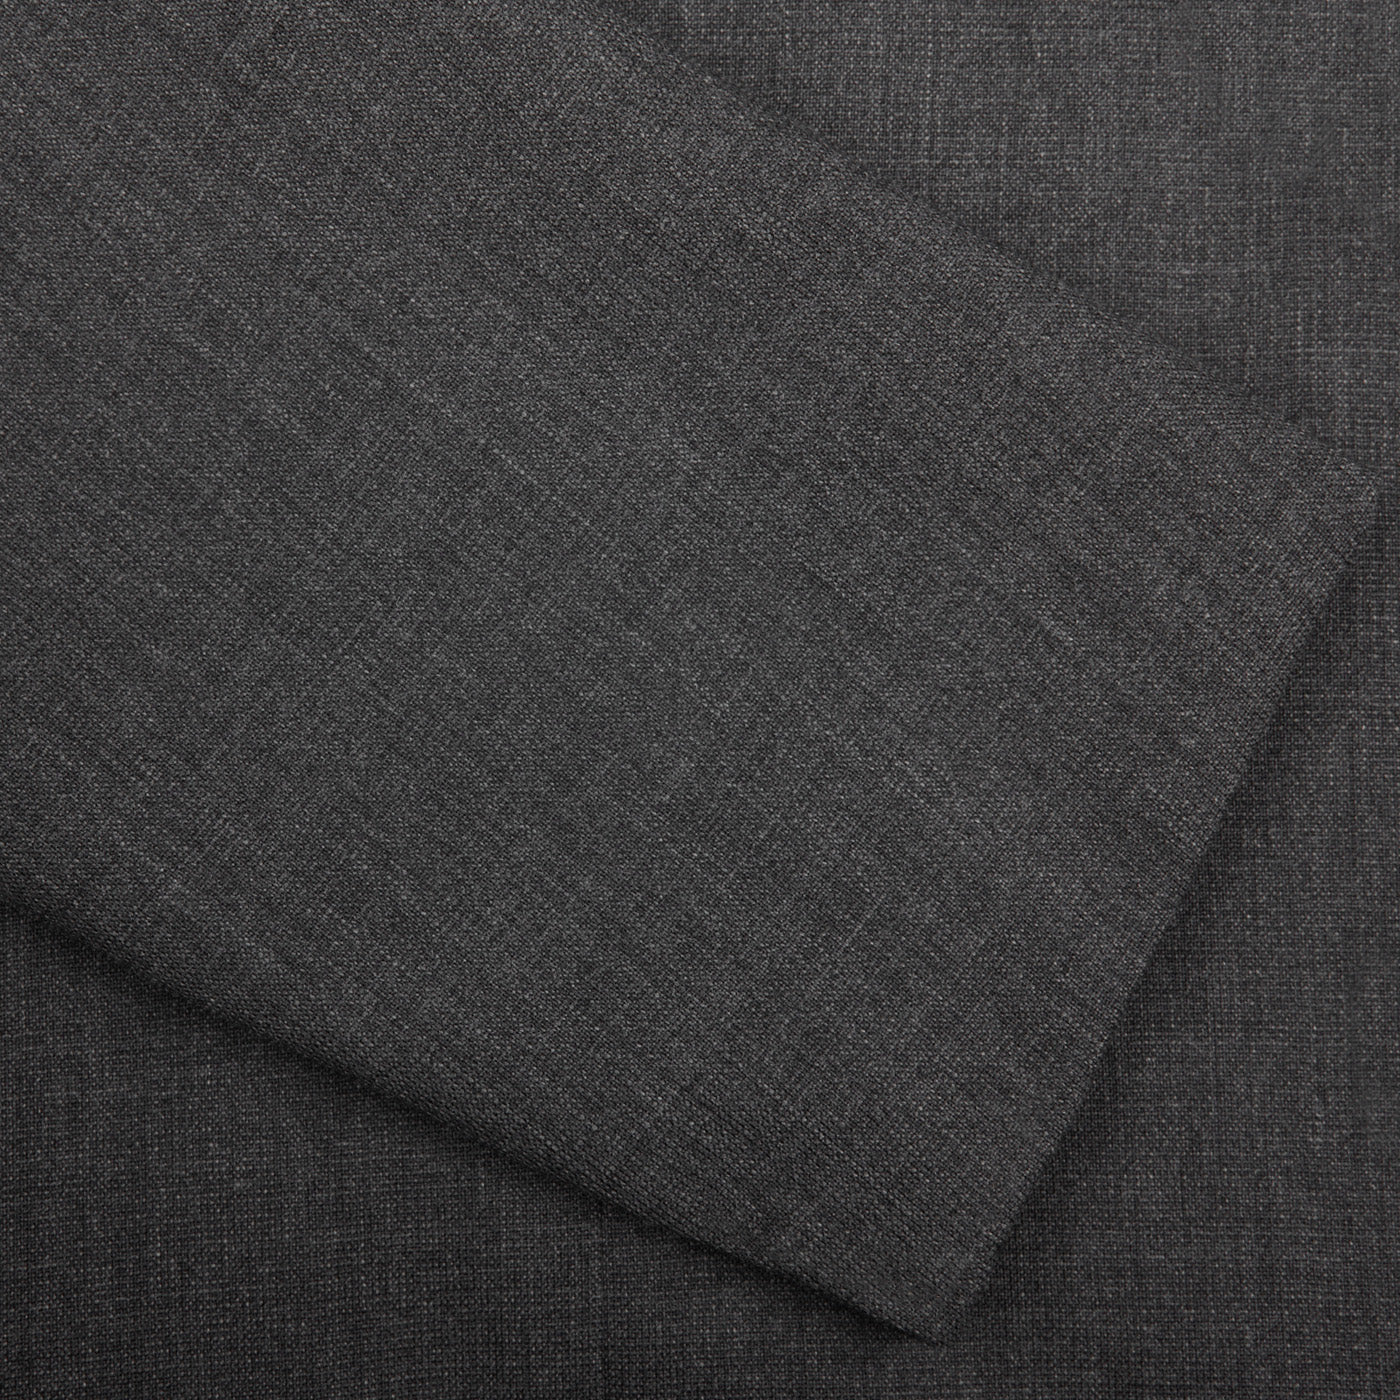 A close up image of a full canvas Grey High Twist Wool Suit made from Ring Jacket fabric.